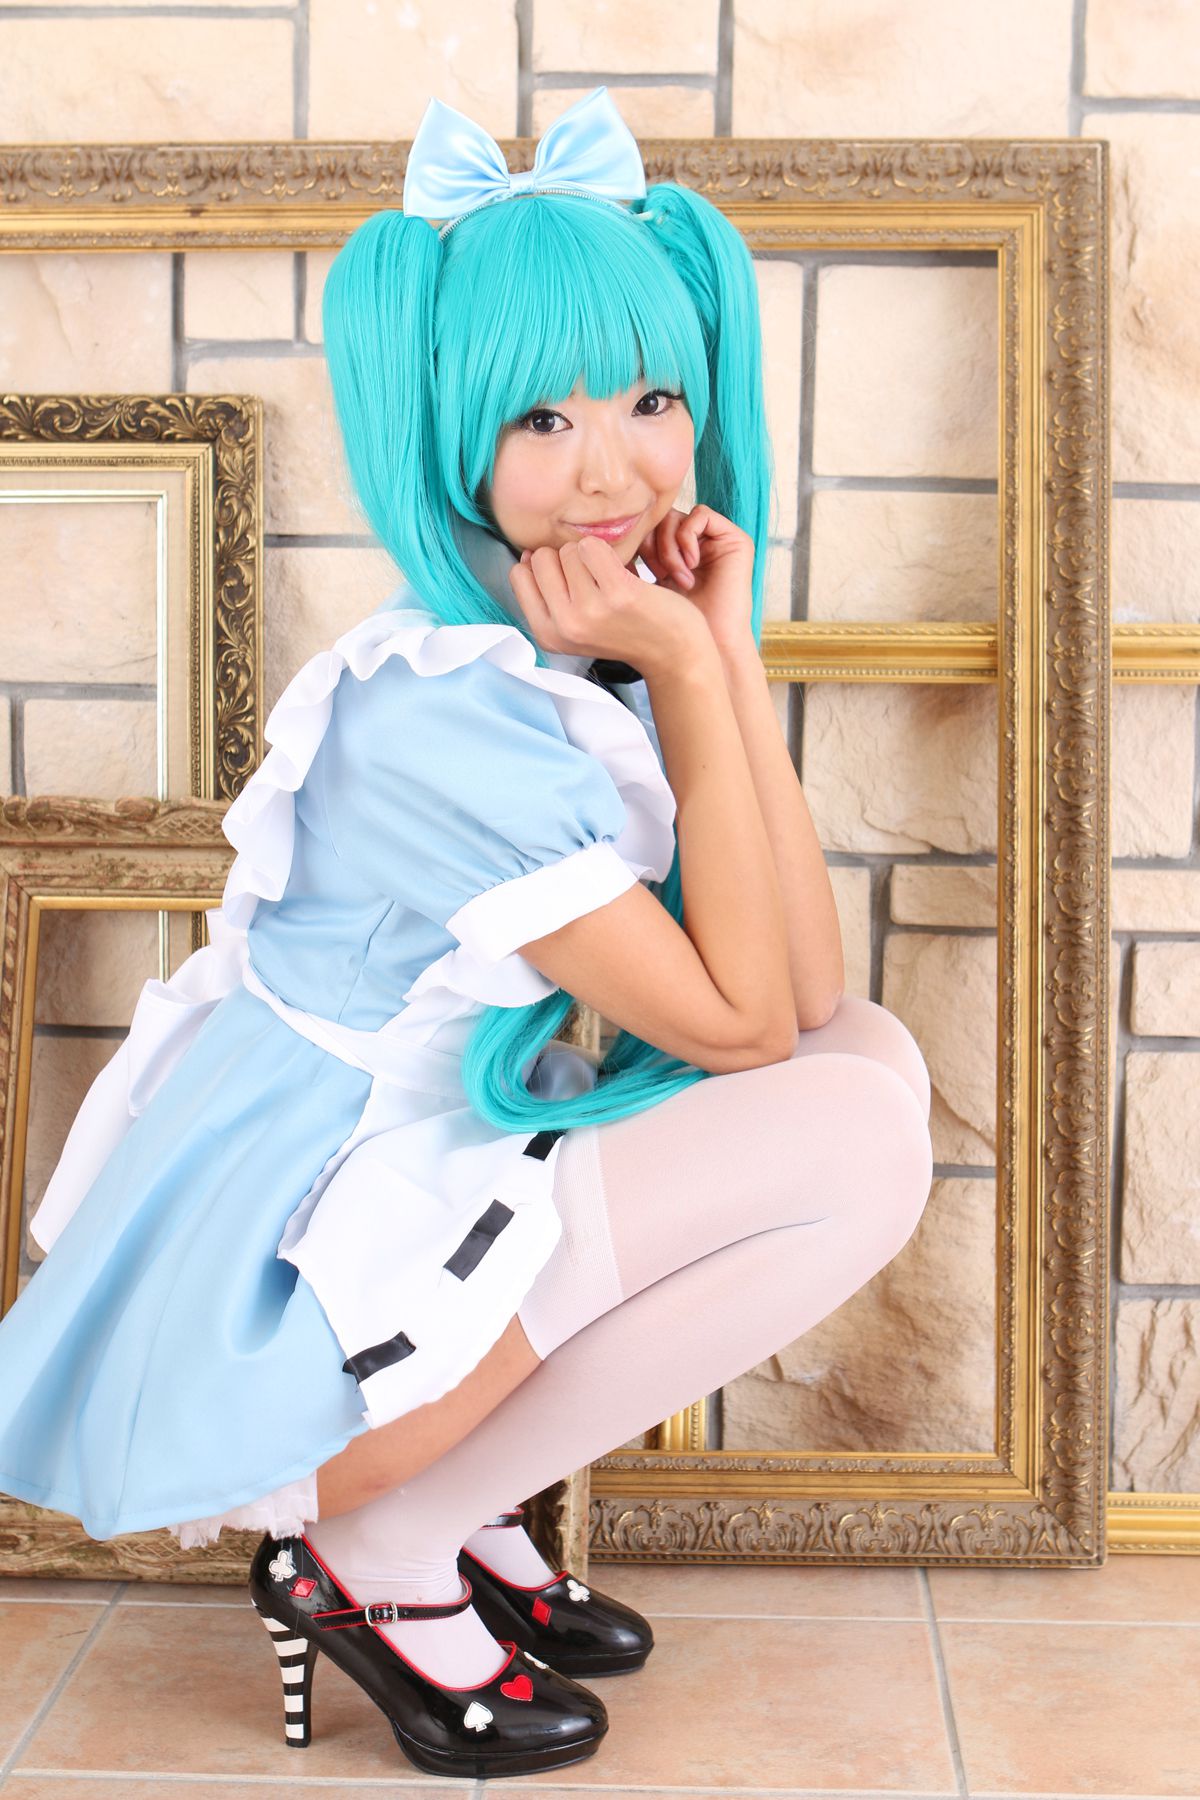 [Cosplay] New Hatsune Miku from Vocaloid - So Sexy[200P]